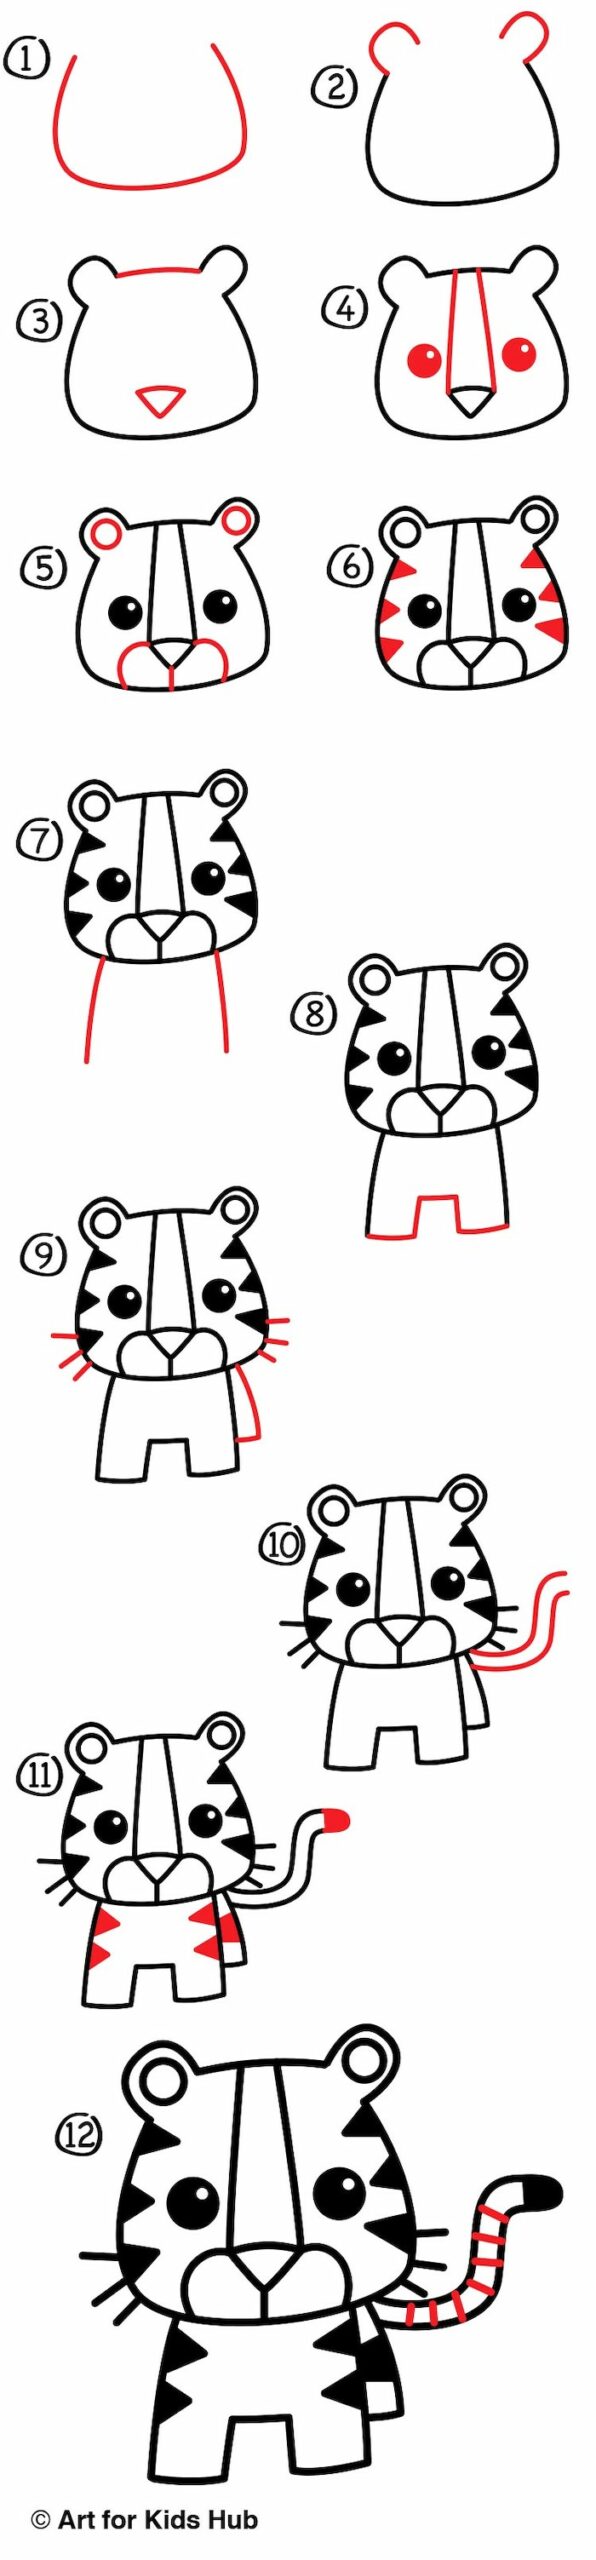 Tiger Cat.How to Draw a Cat|20 Easy Cat Drawing Ideas (Step-By-Step)